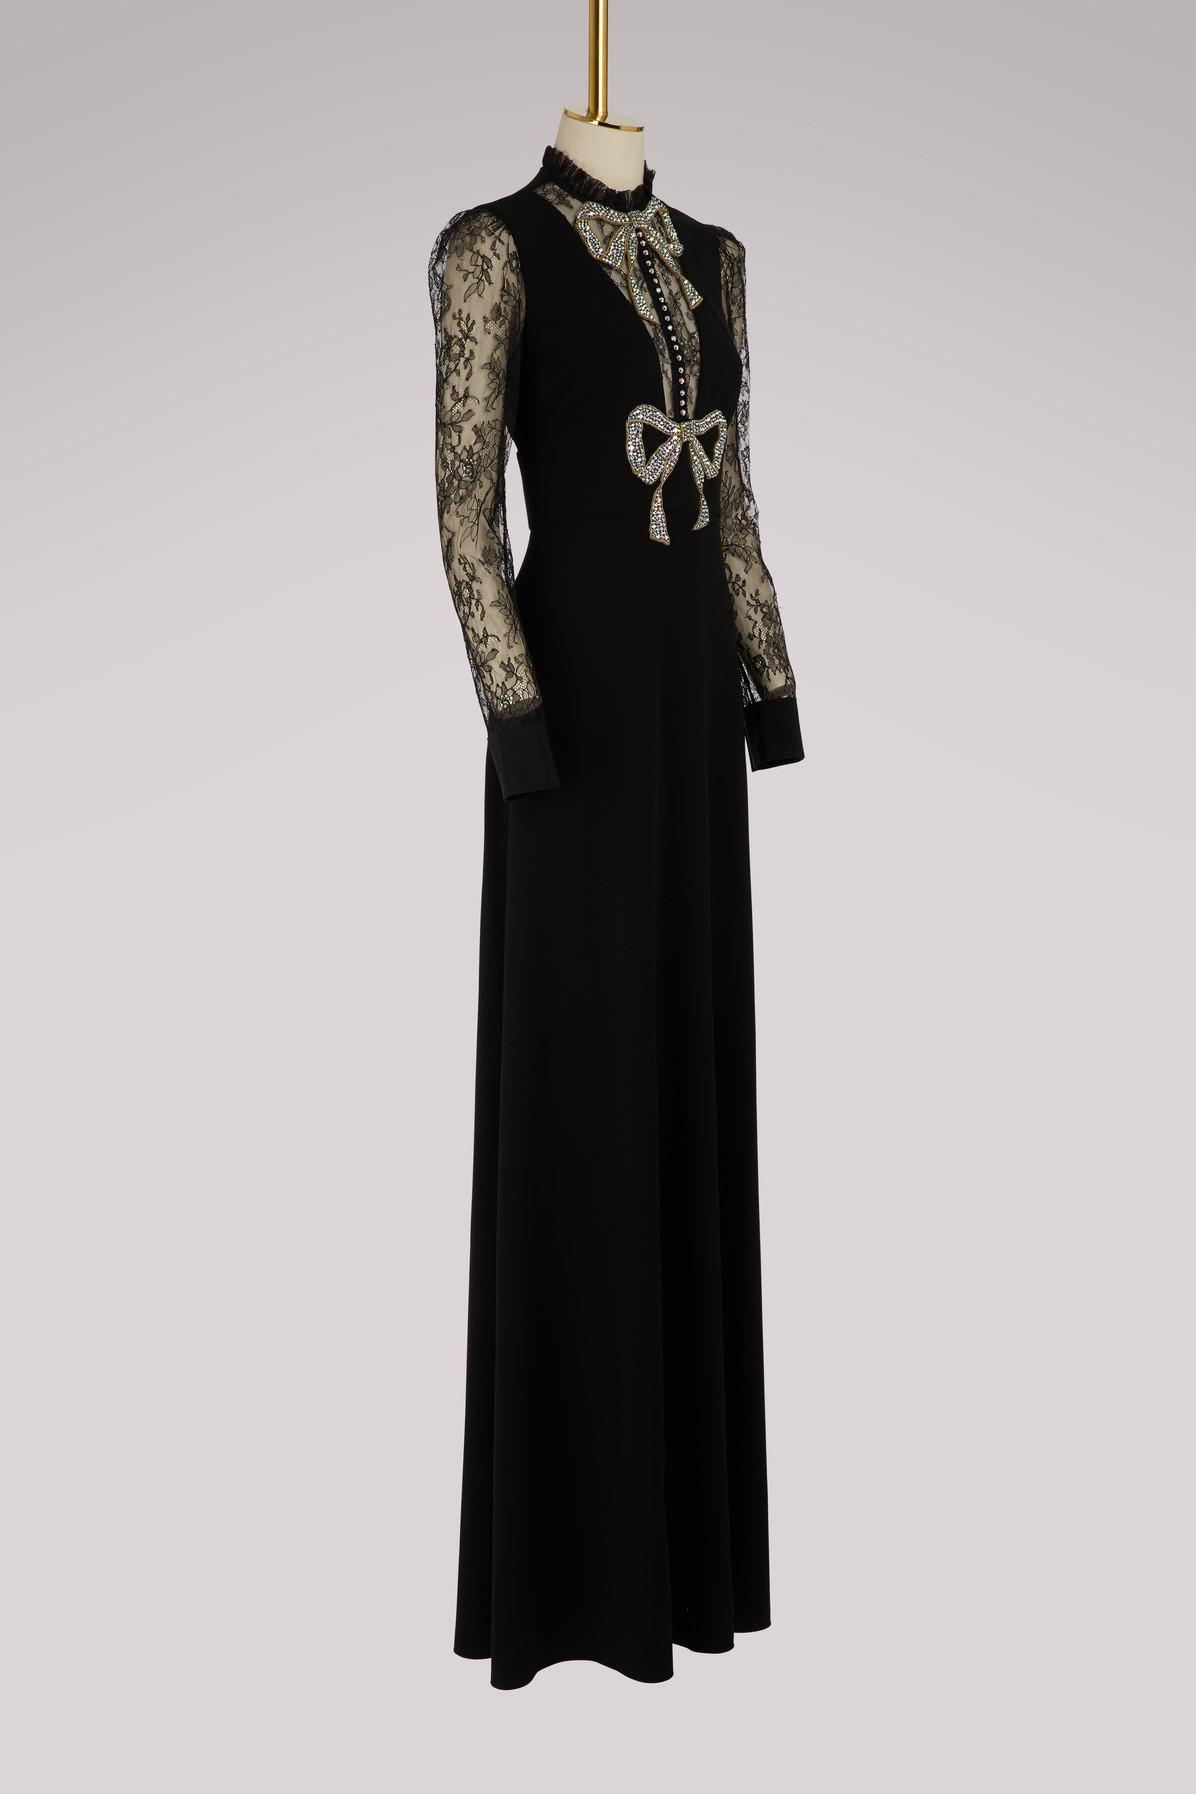 gucci black gown